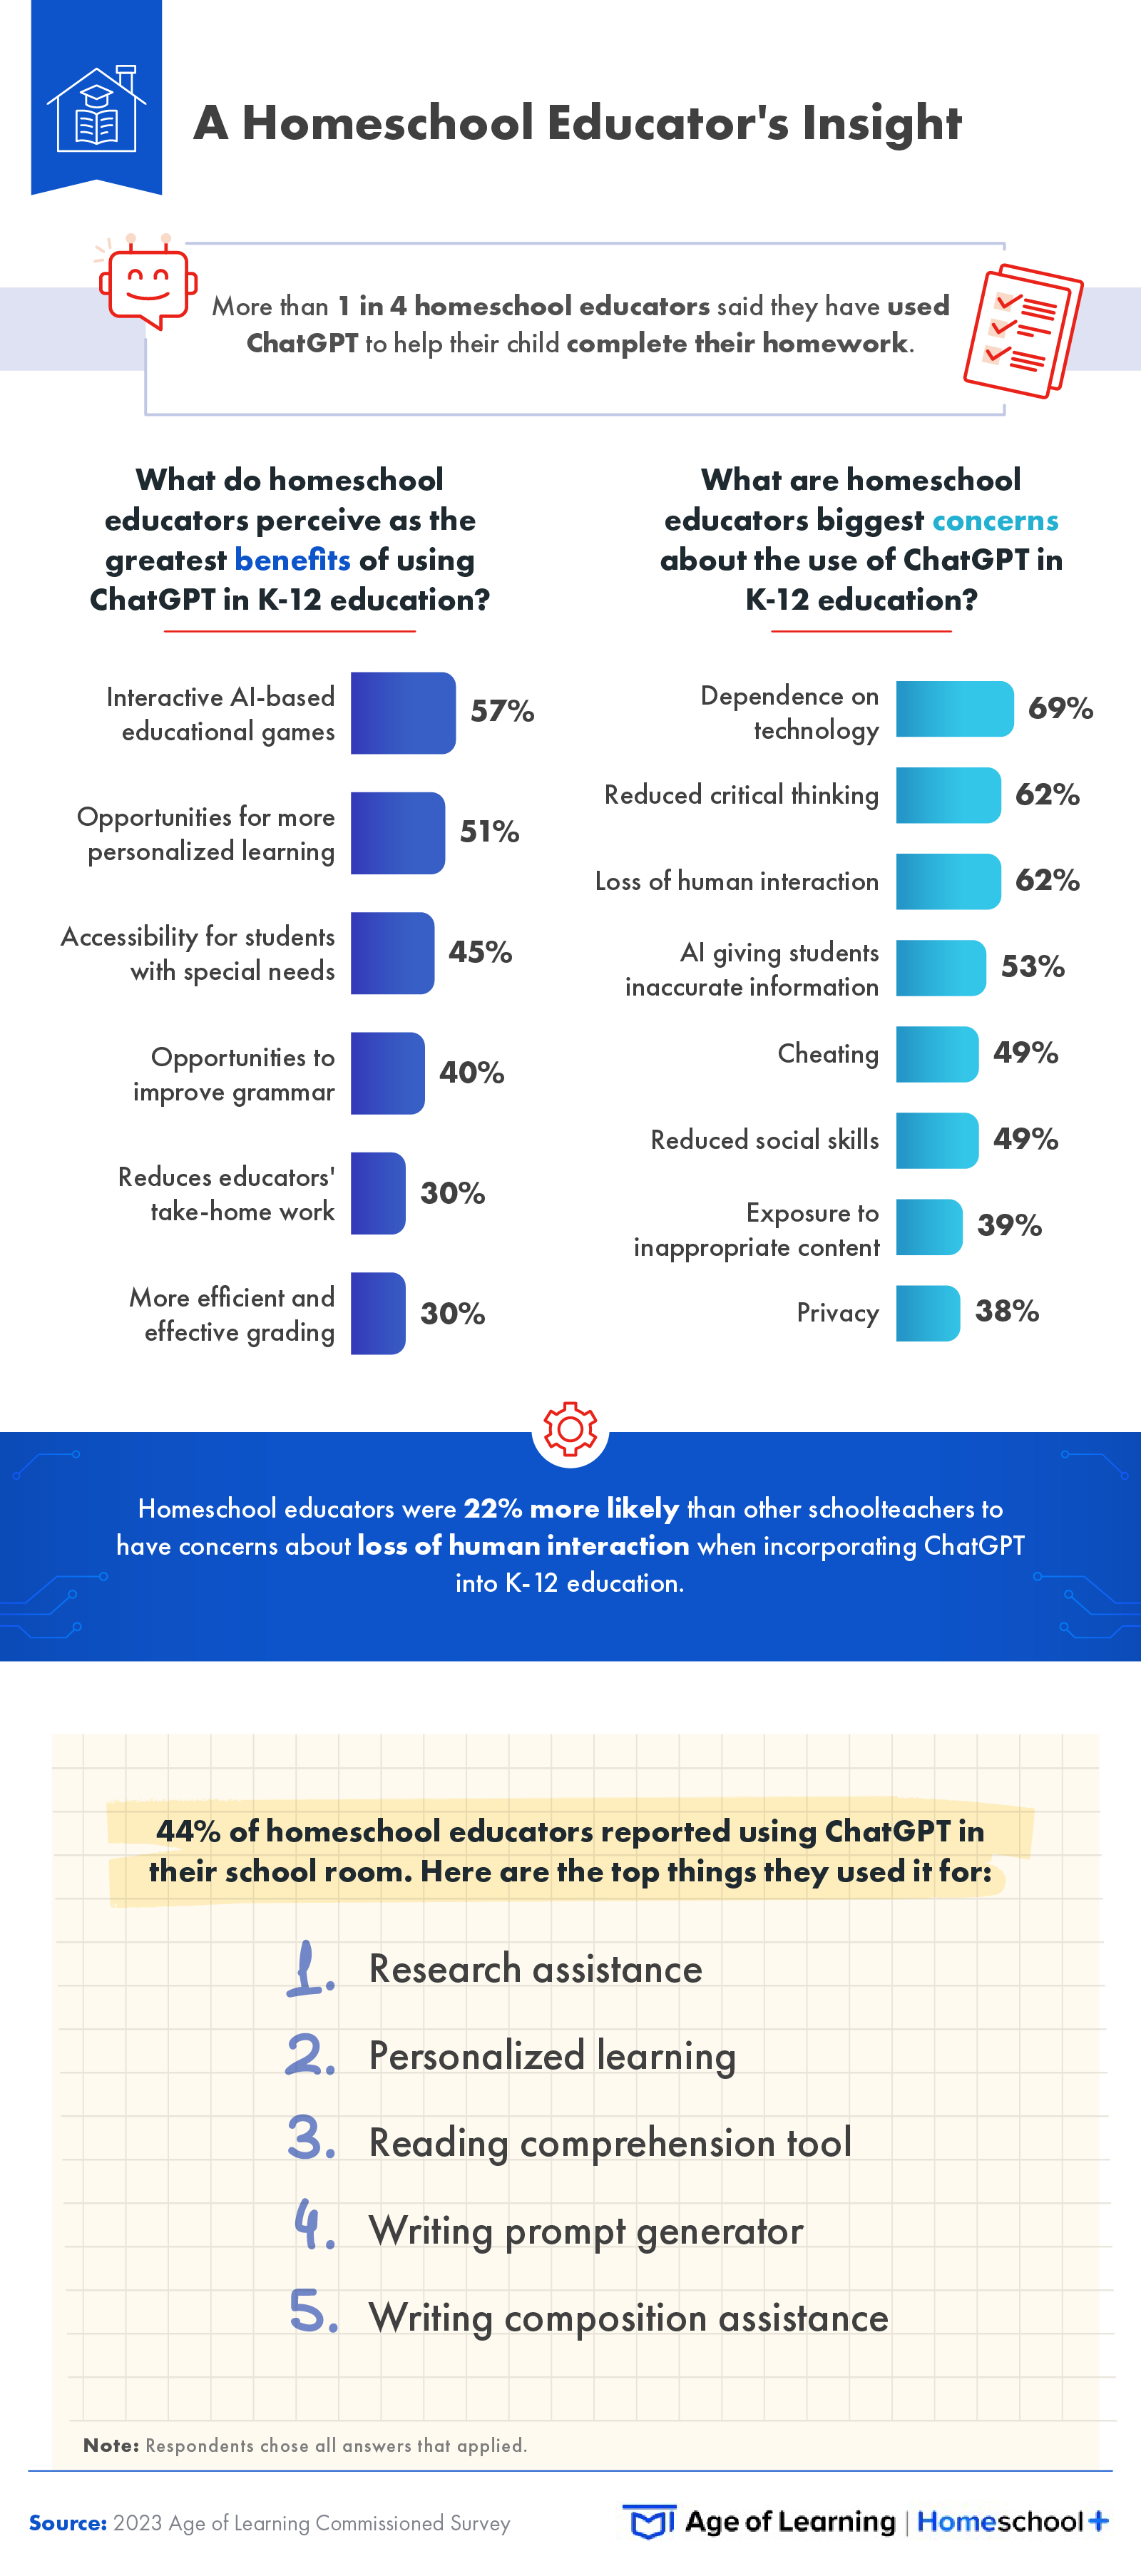 This infographic explores homeschool educators perceived benefits and concerns of using ChatGPT in K-12 education. 